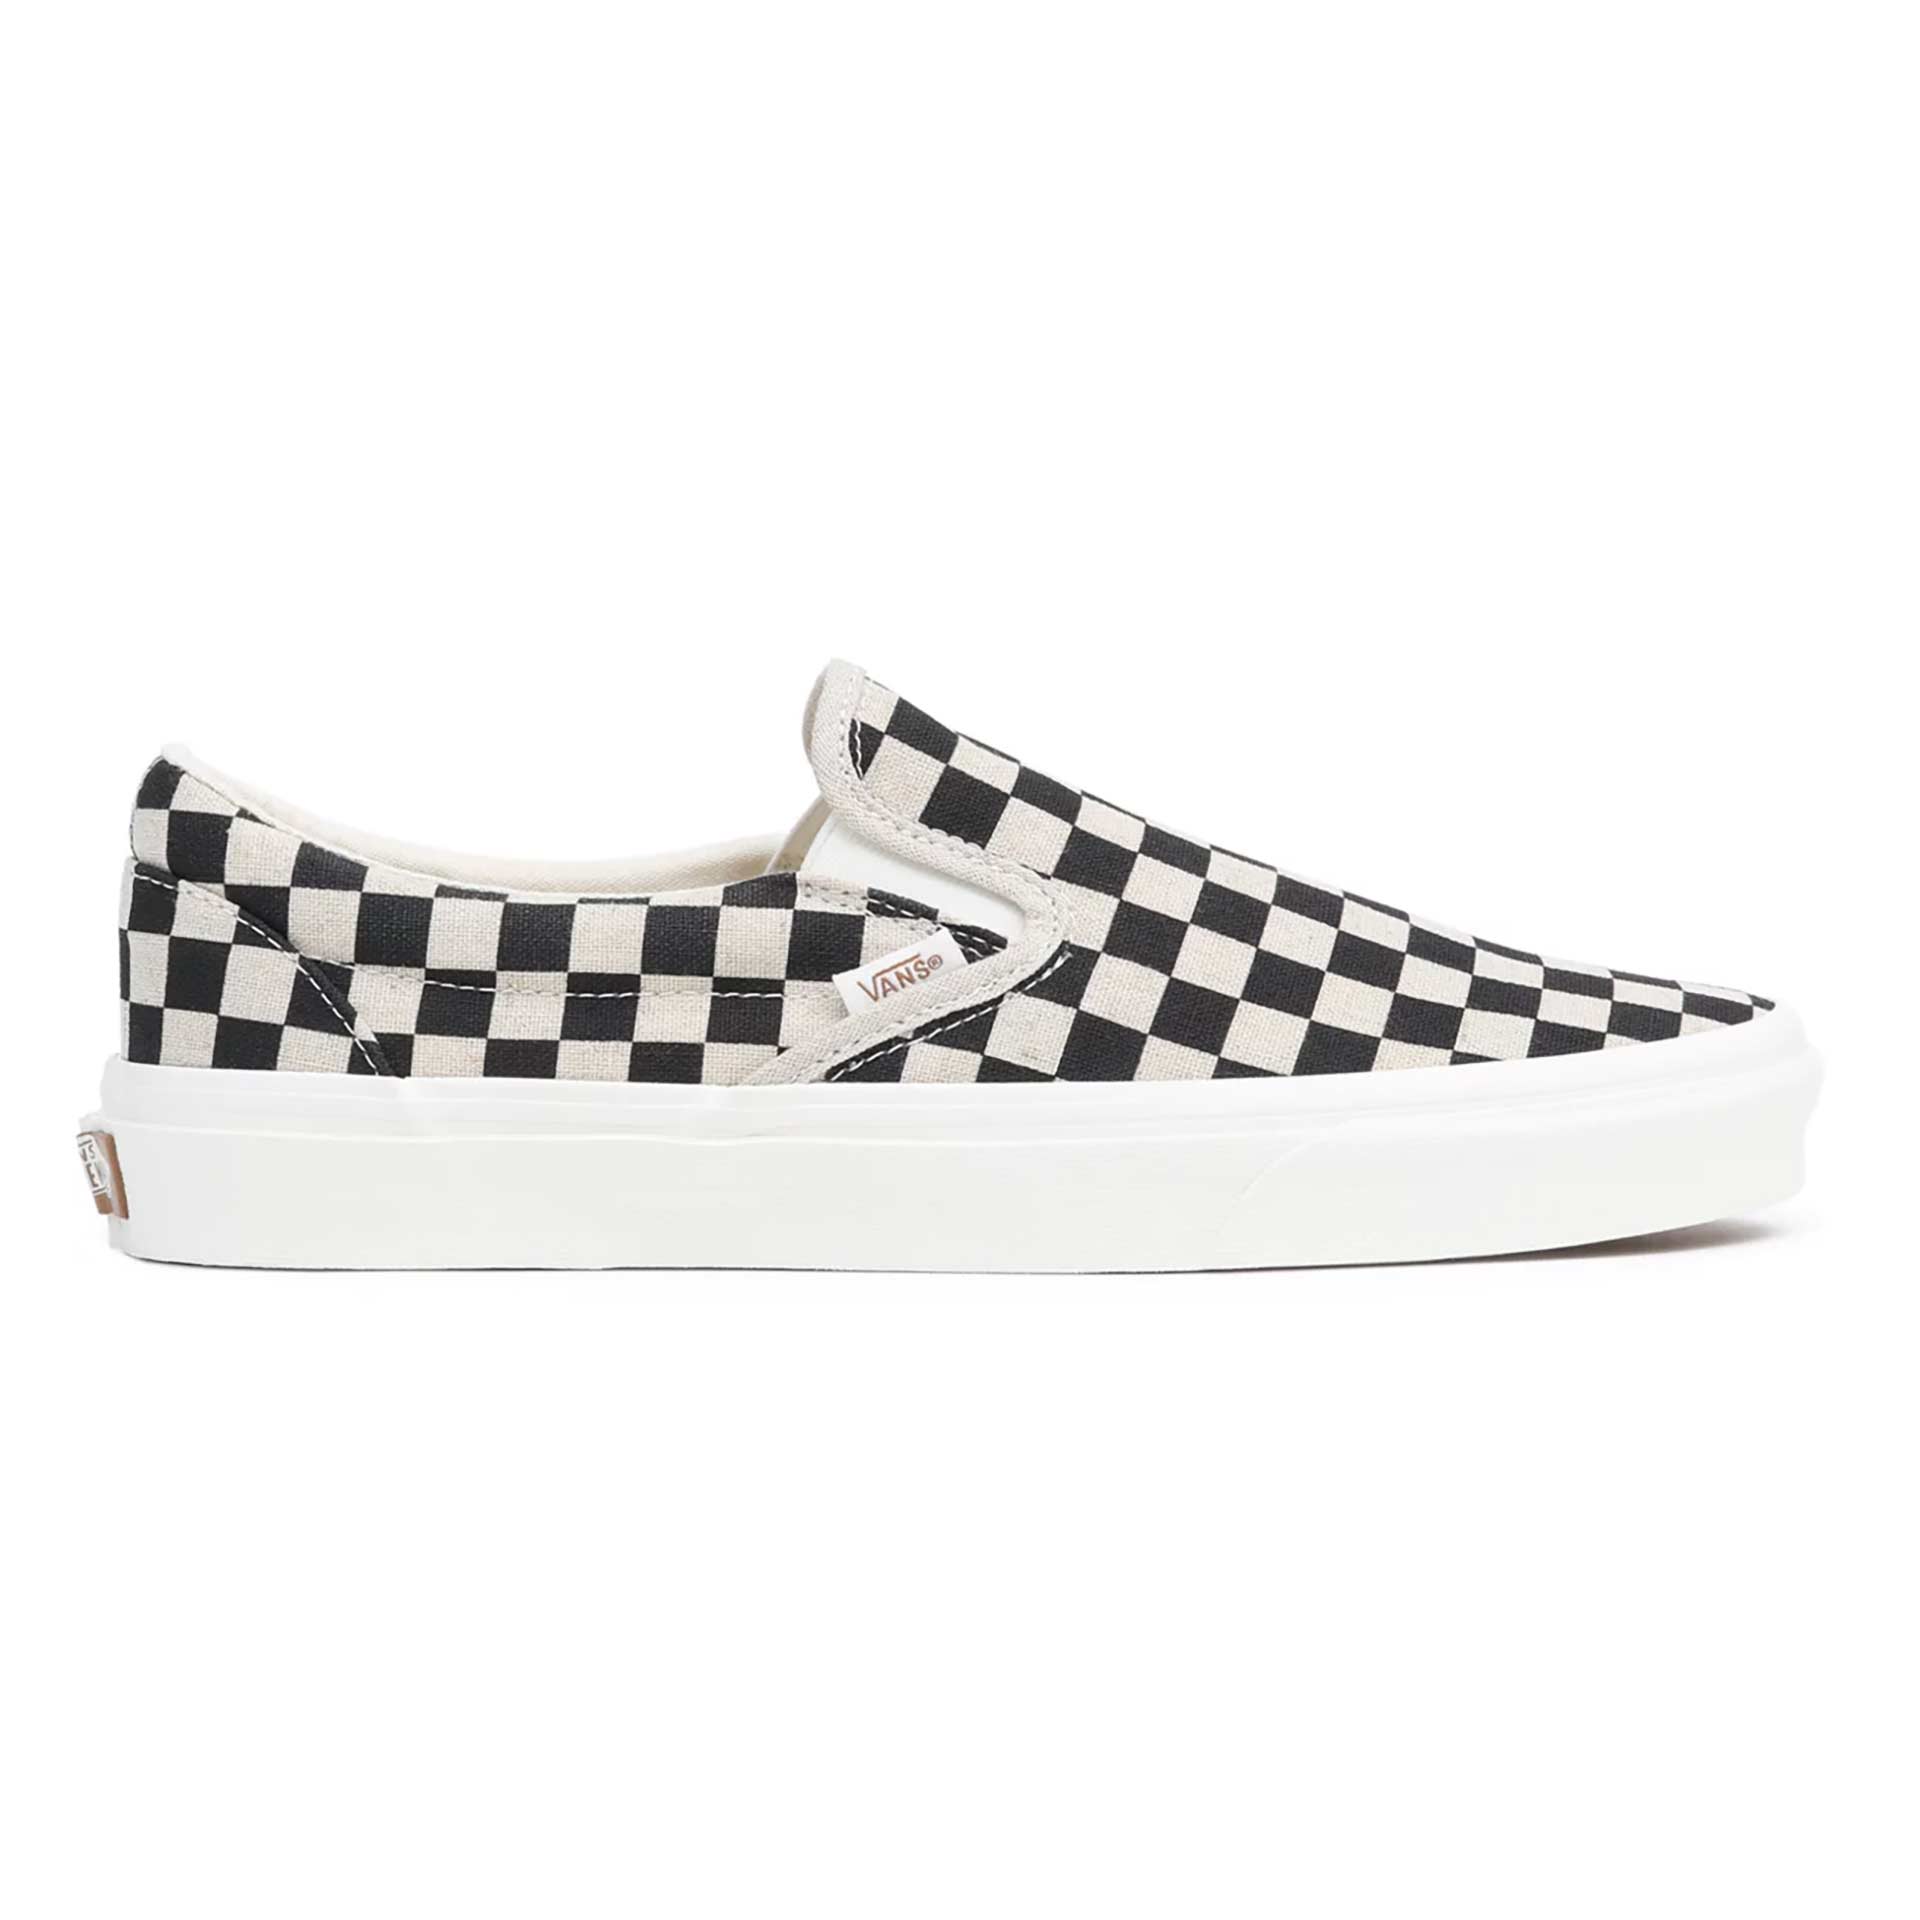 Vans Classic Slip-On Eco Theory Checkerboard Black/White 02